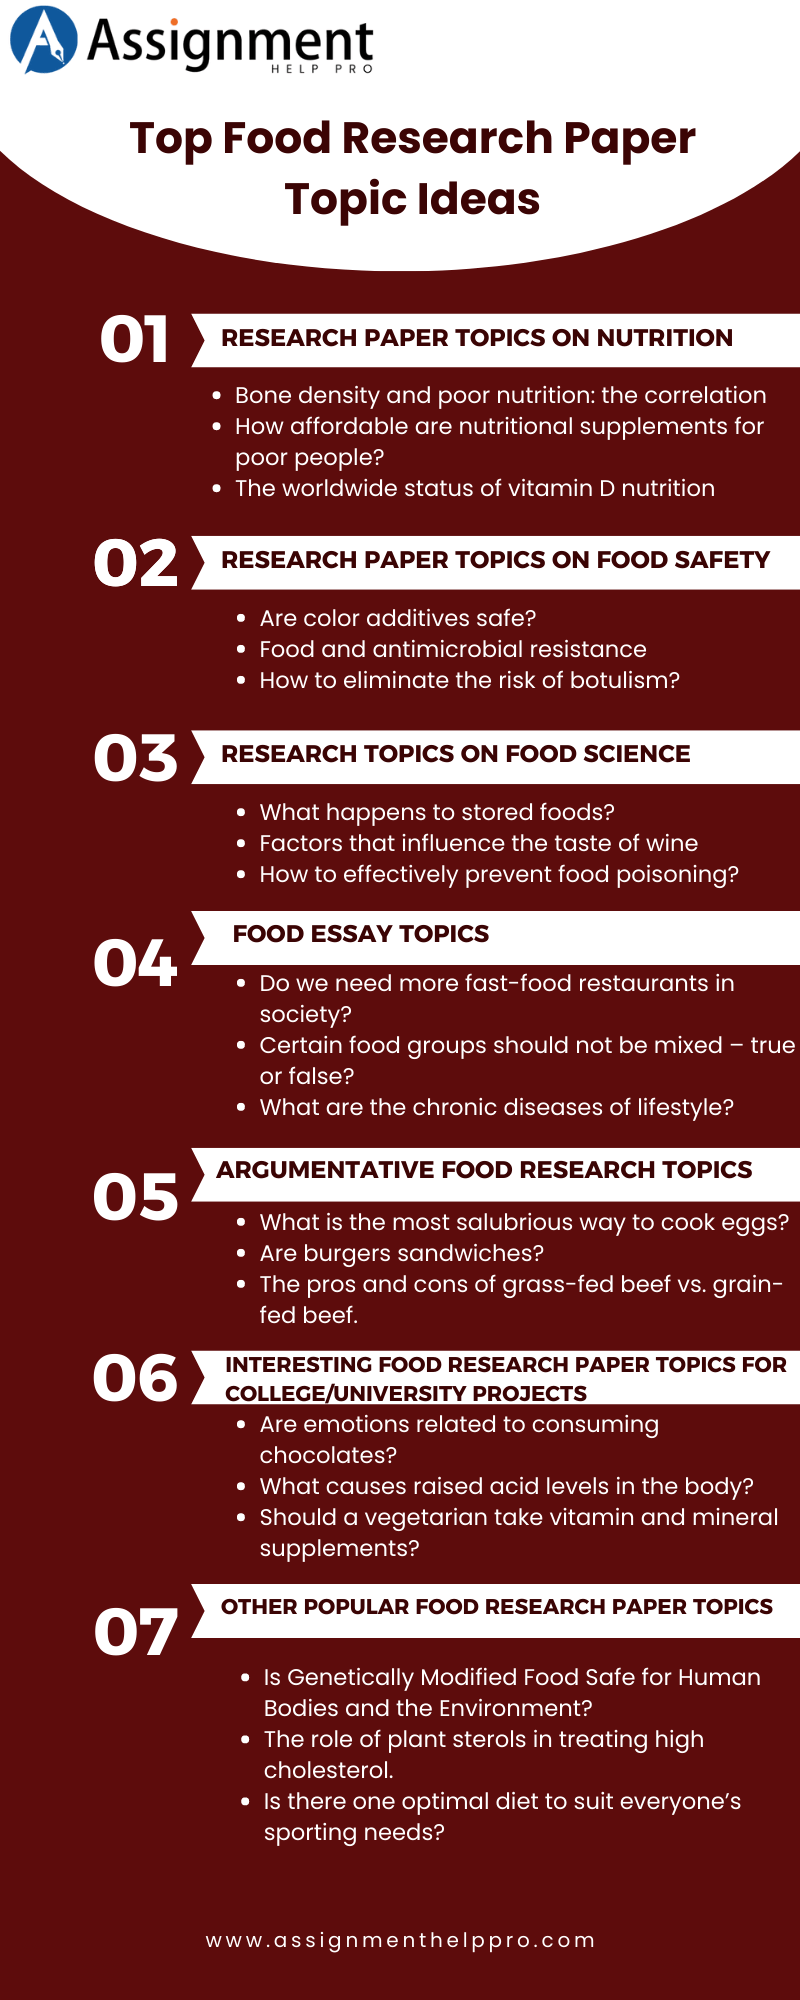 Research Paper Topics on Food Safety